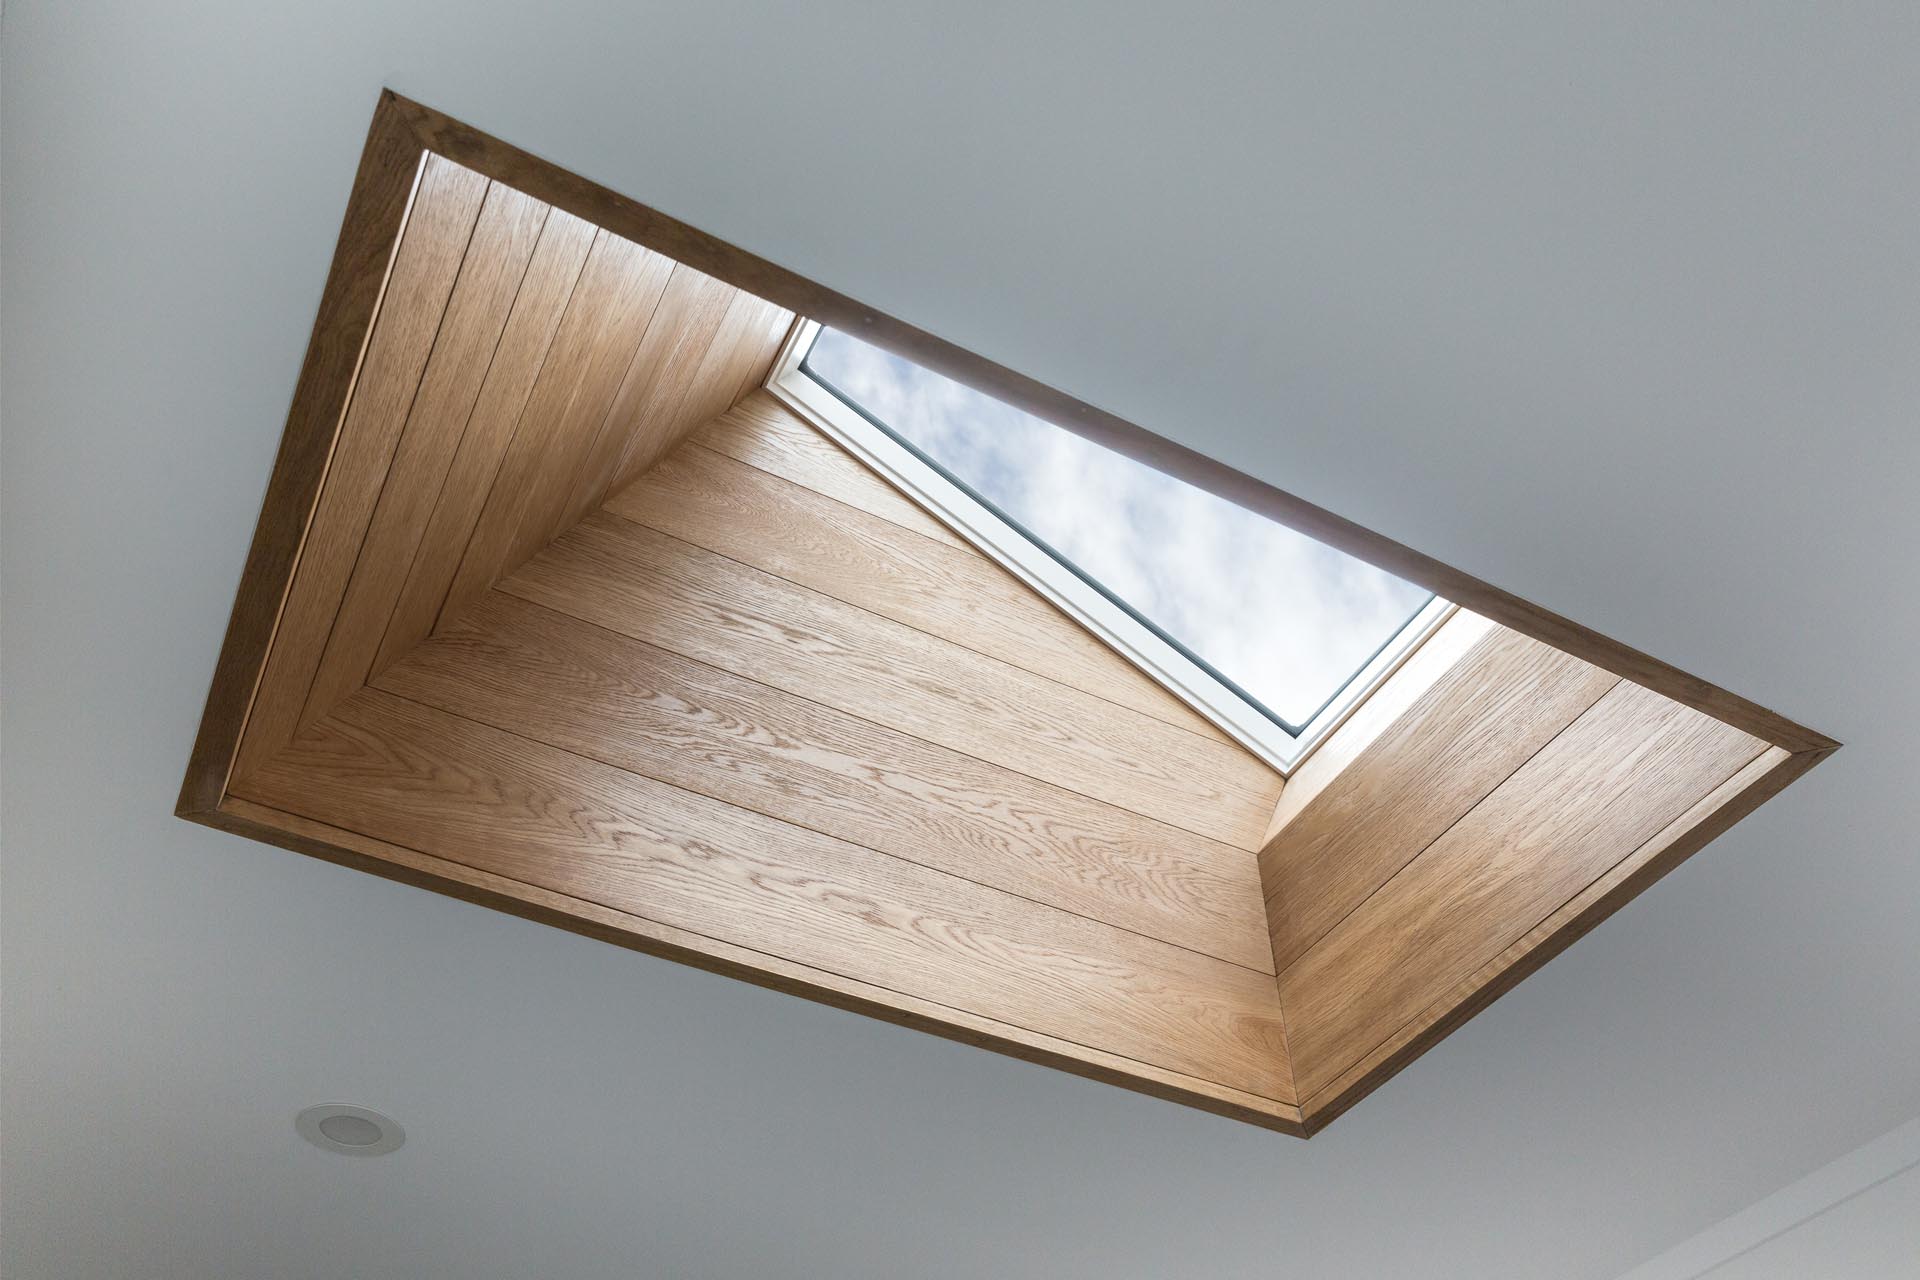 A wood lined skylight adds extra natural light to the stairwell below.